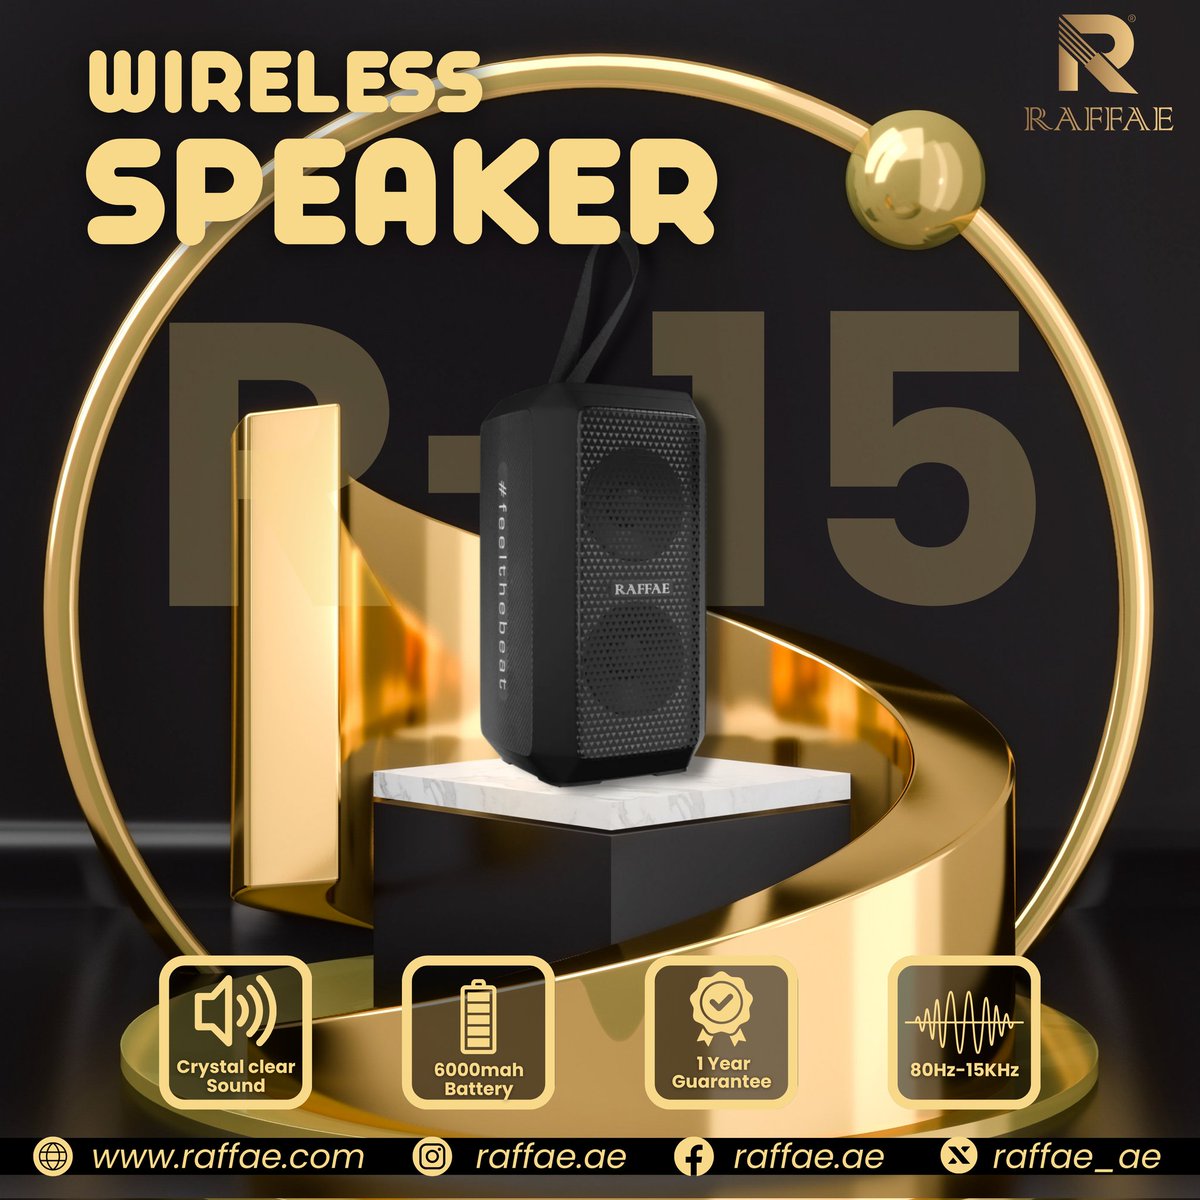 Elevate your sound experience with our wireless speaker featuring a 6000mAh battery for up to 6 hours of non-stop music. Unplug and immerse yourself in audio bliss. 🔊 #WirelessSpeaker #LongLastingSound #AudioEscape